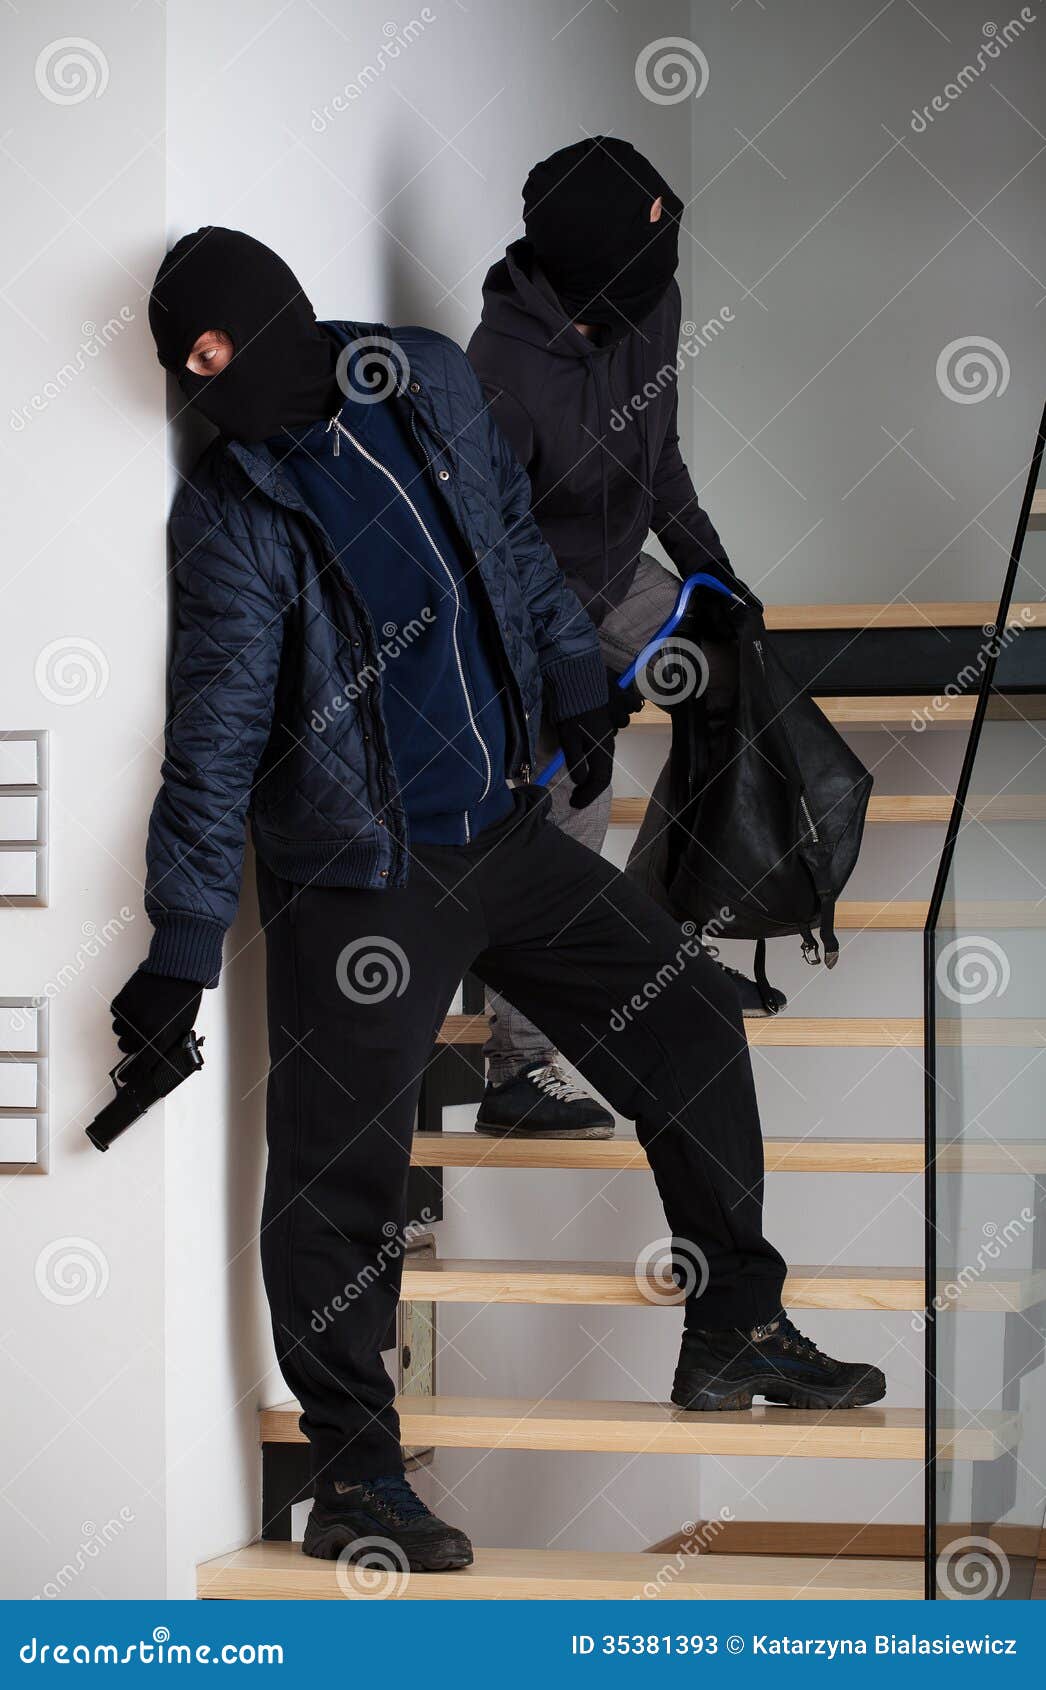 Two burglars escaping stock im picture pic